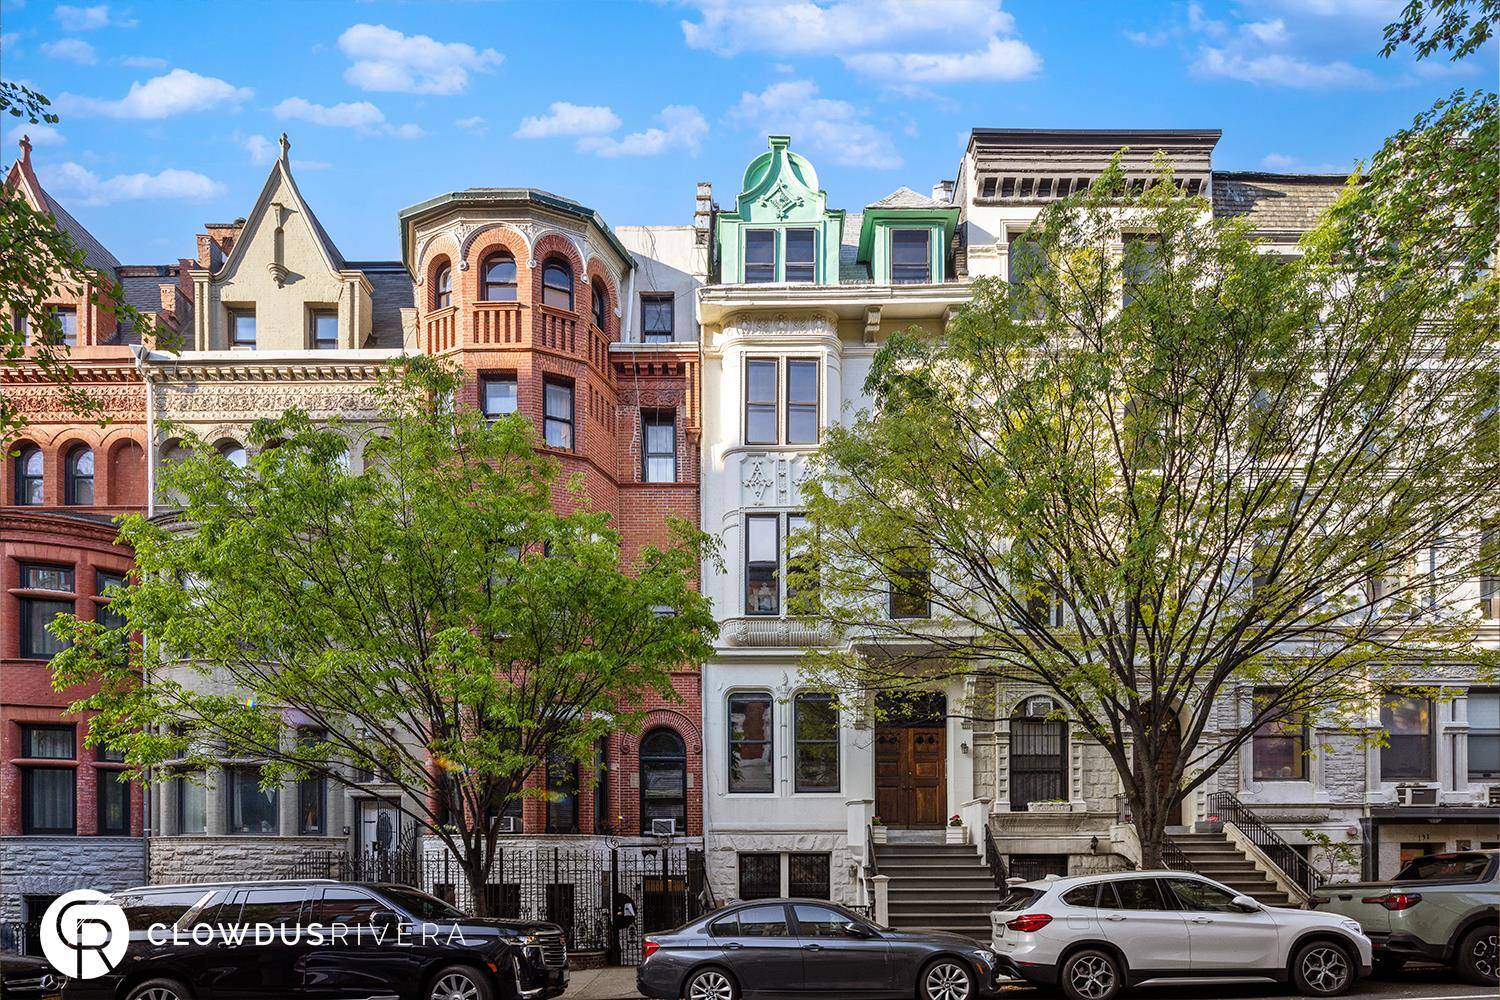 SPACIOUS QUADRUPLEX HISTORIC TOWNHOUSE LANDMARK UWS BLOCK135 WEST 81ST STREET, APT AYOUR HOMEPerfectly situated on the crest of one of the Upper West Side s most memorable, colorful and well ...